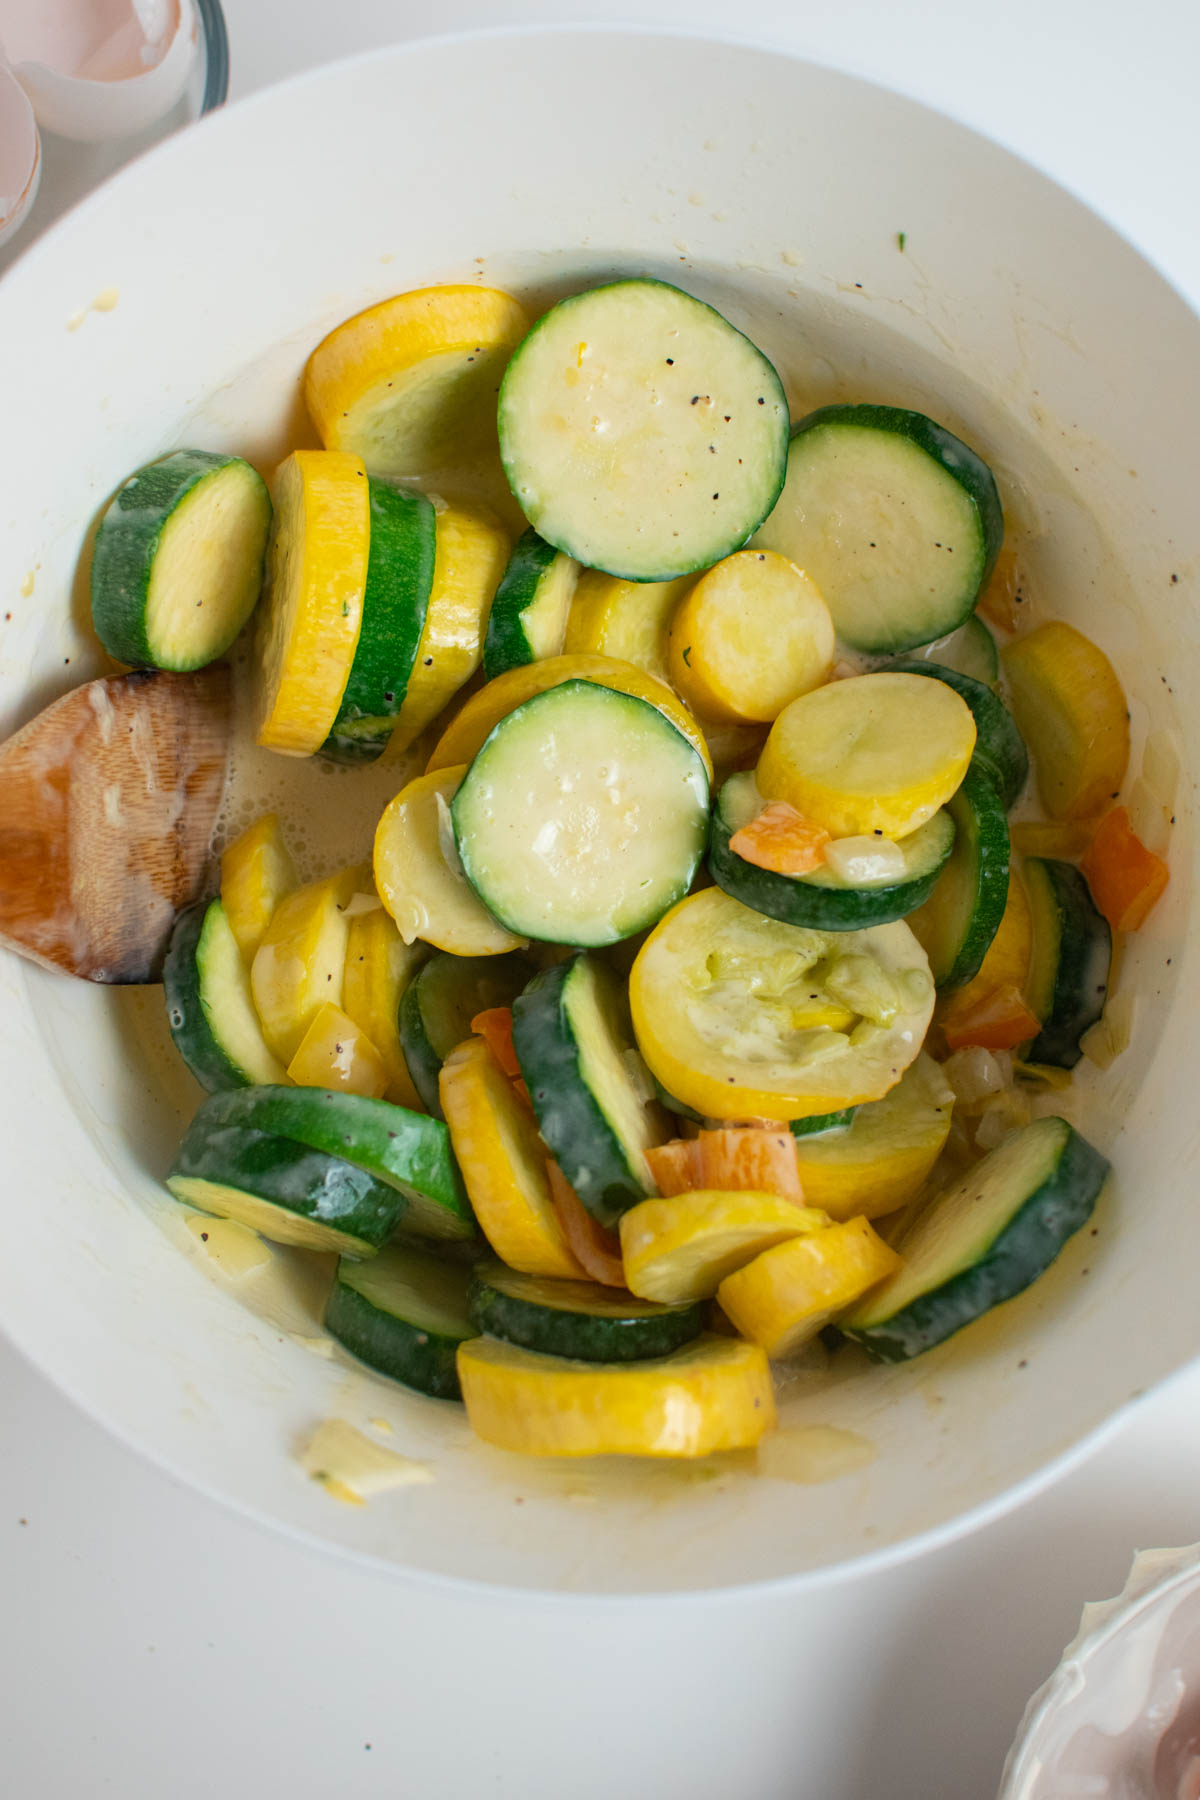 Zucchini and squash covered in egg mixture in white bowl.